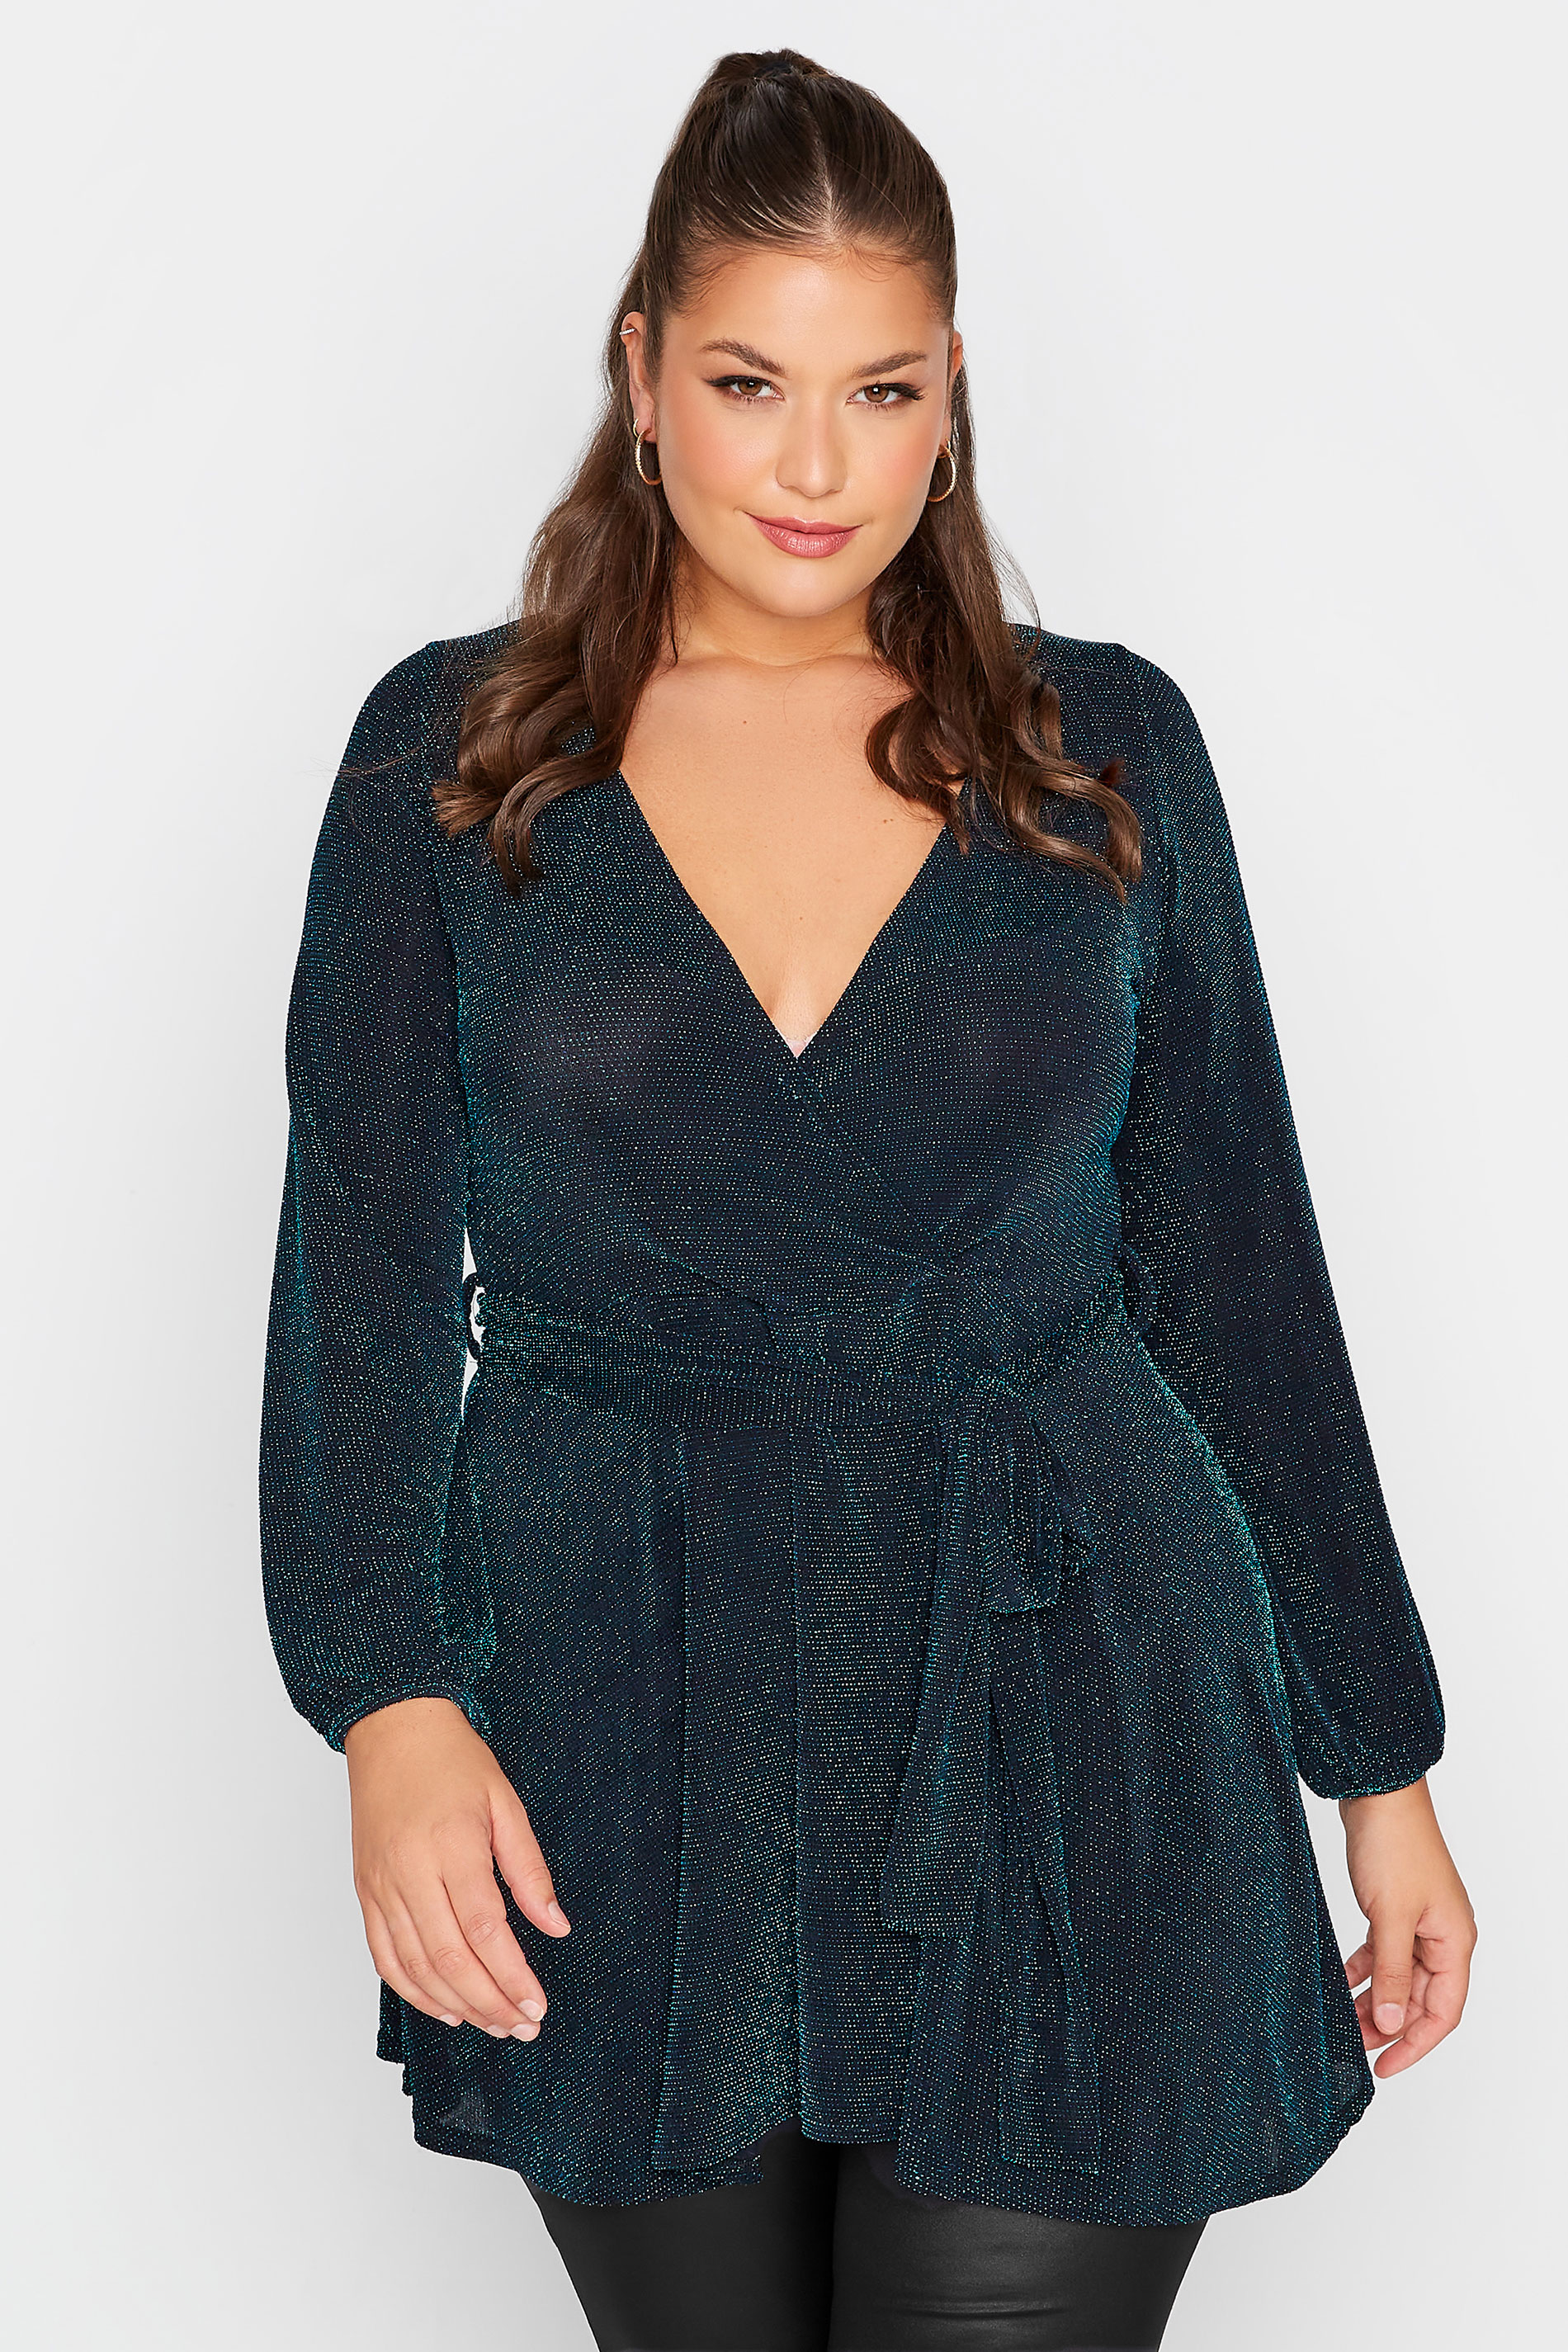 YOURS LONDON Curve Teal Blue Glitter Wrap Top 1